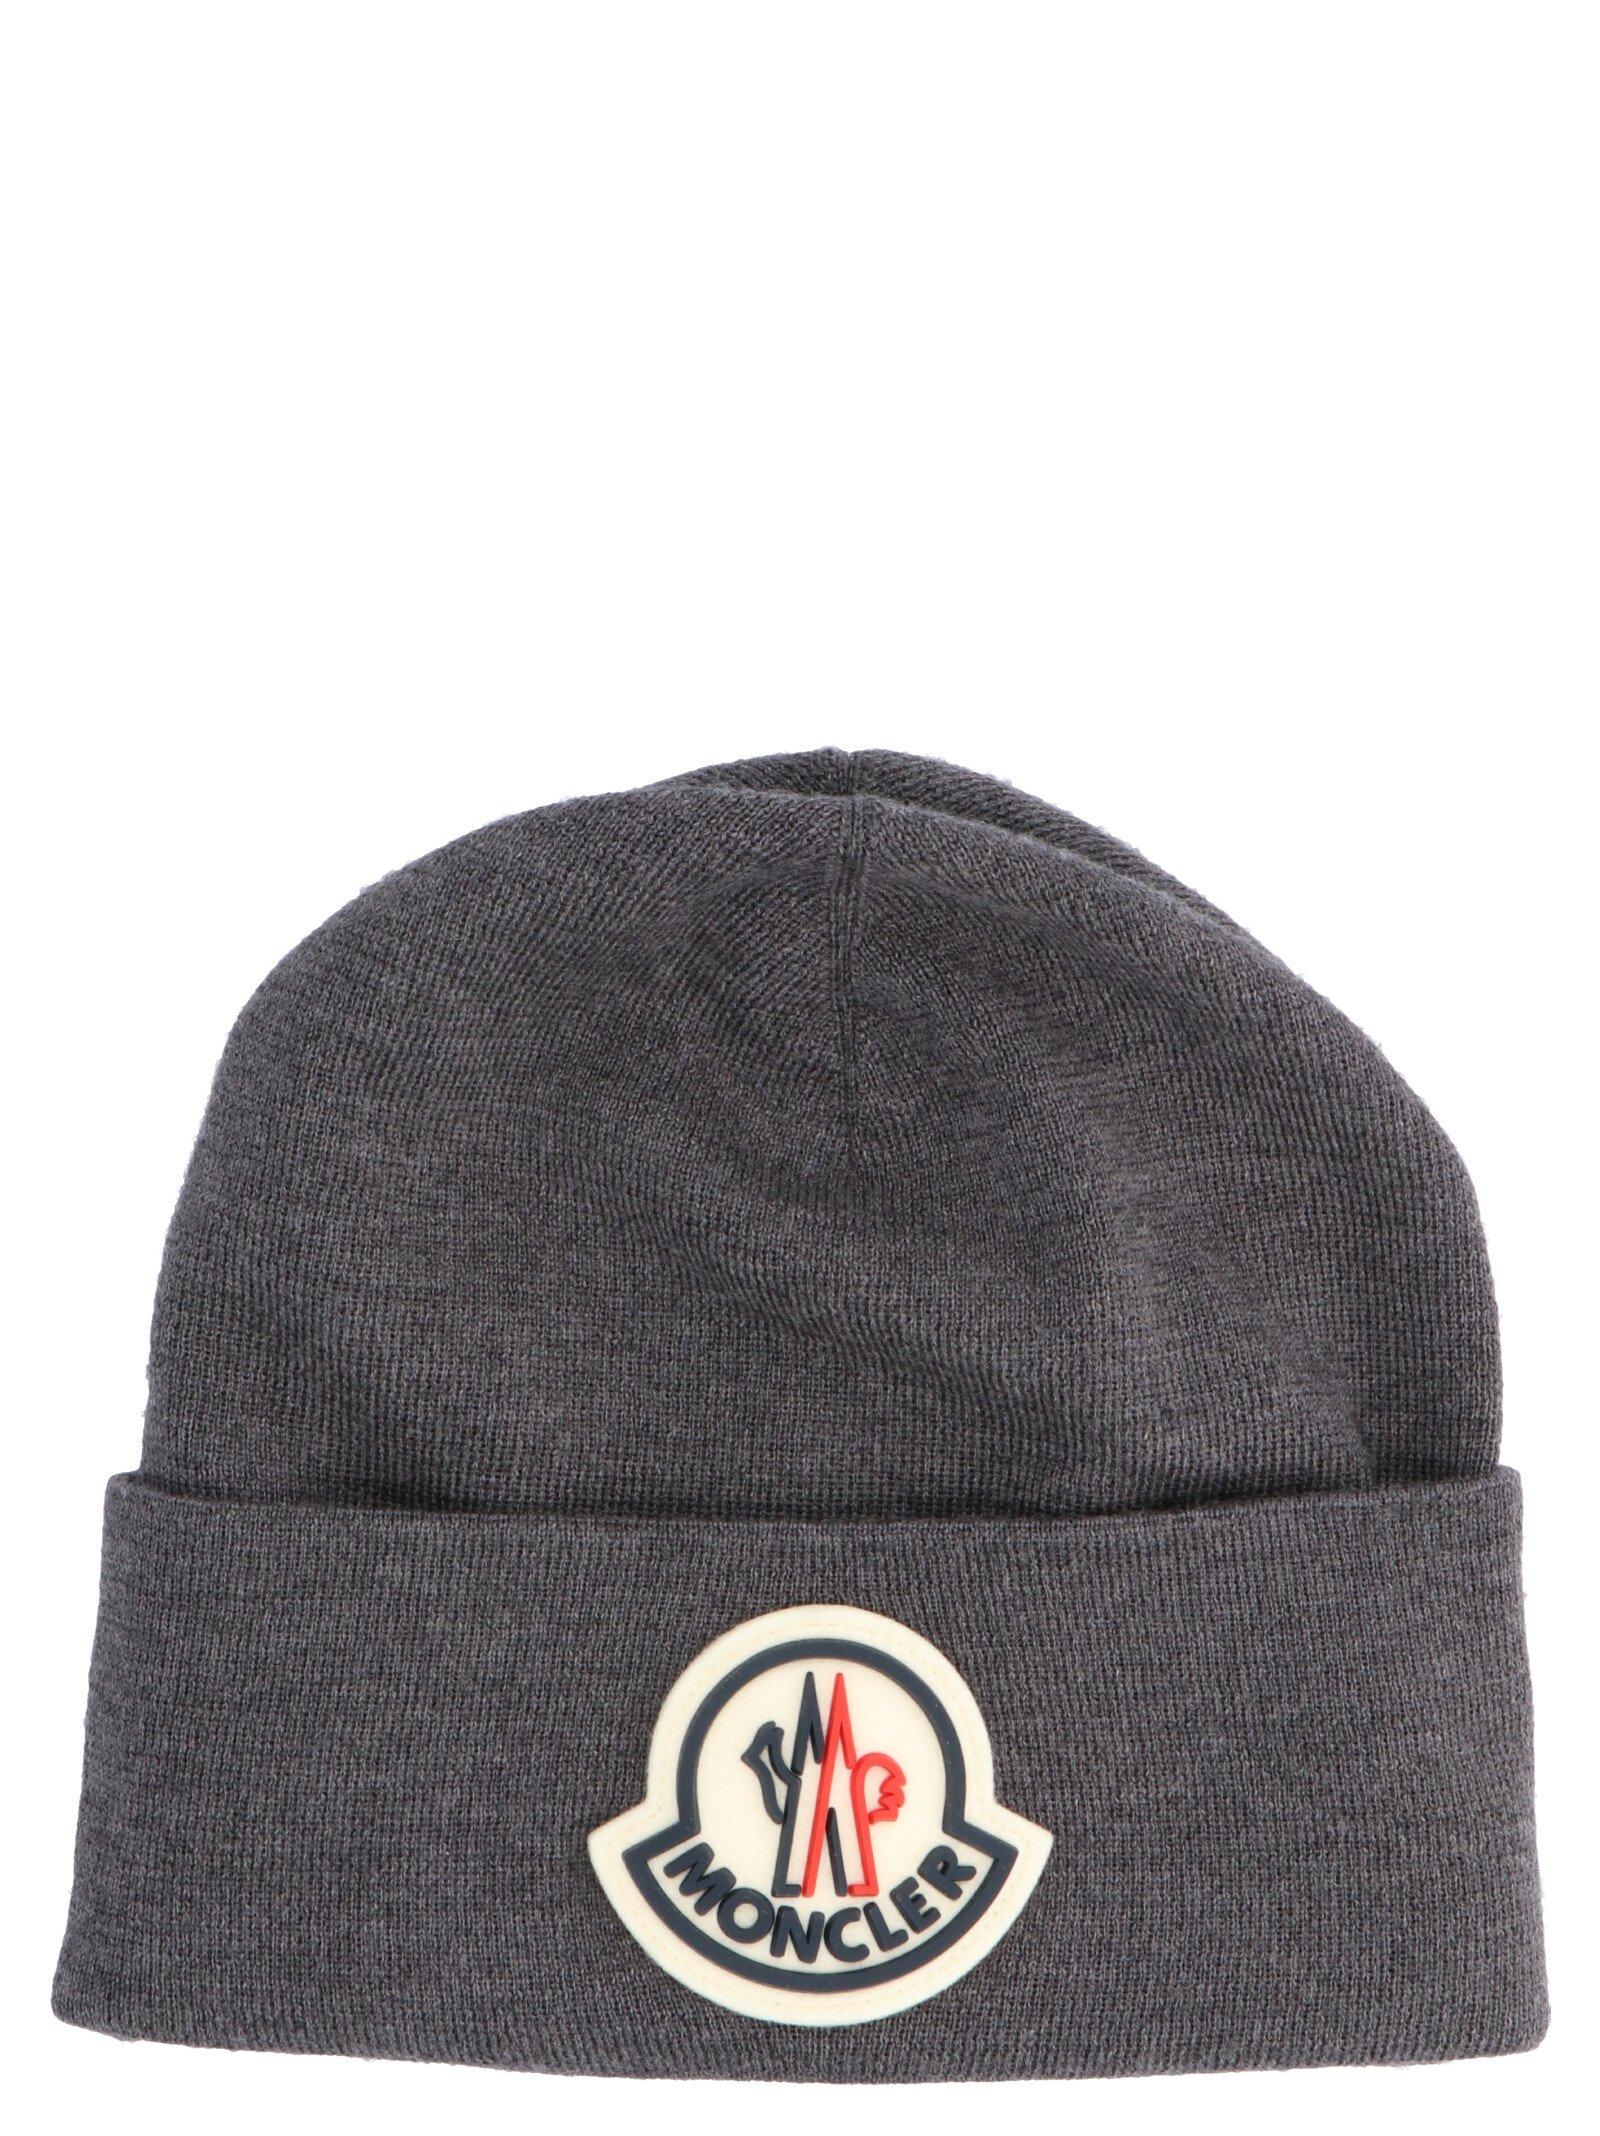 Moncler Logo Patch Beanie in Grey (Gray) for Men - Lyst